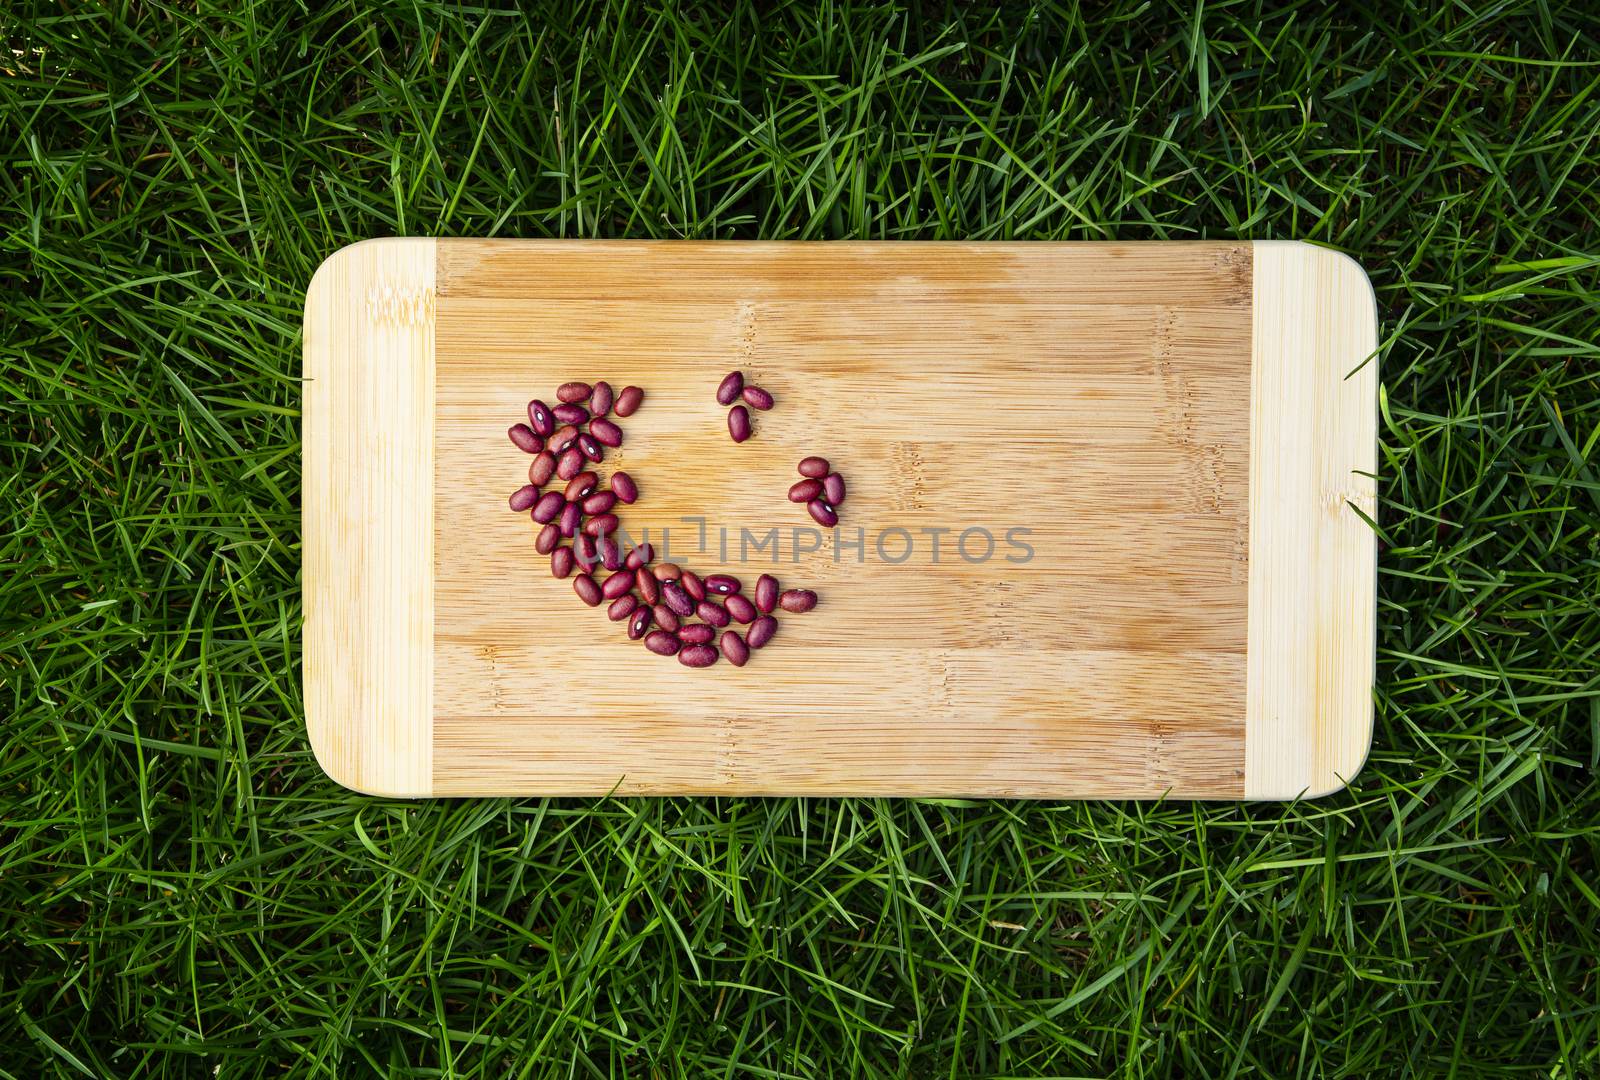 smiley face made of red kidney on top of a wood cutting board, laying on top of green grass